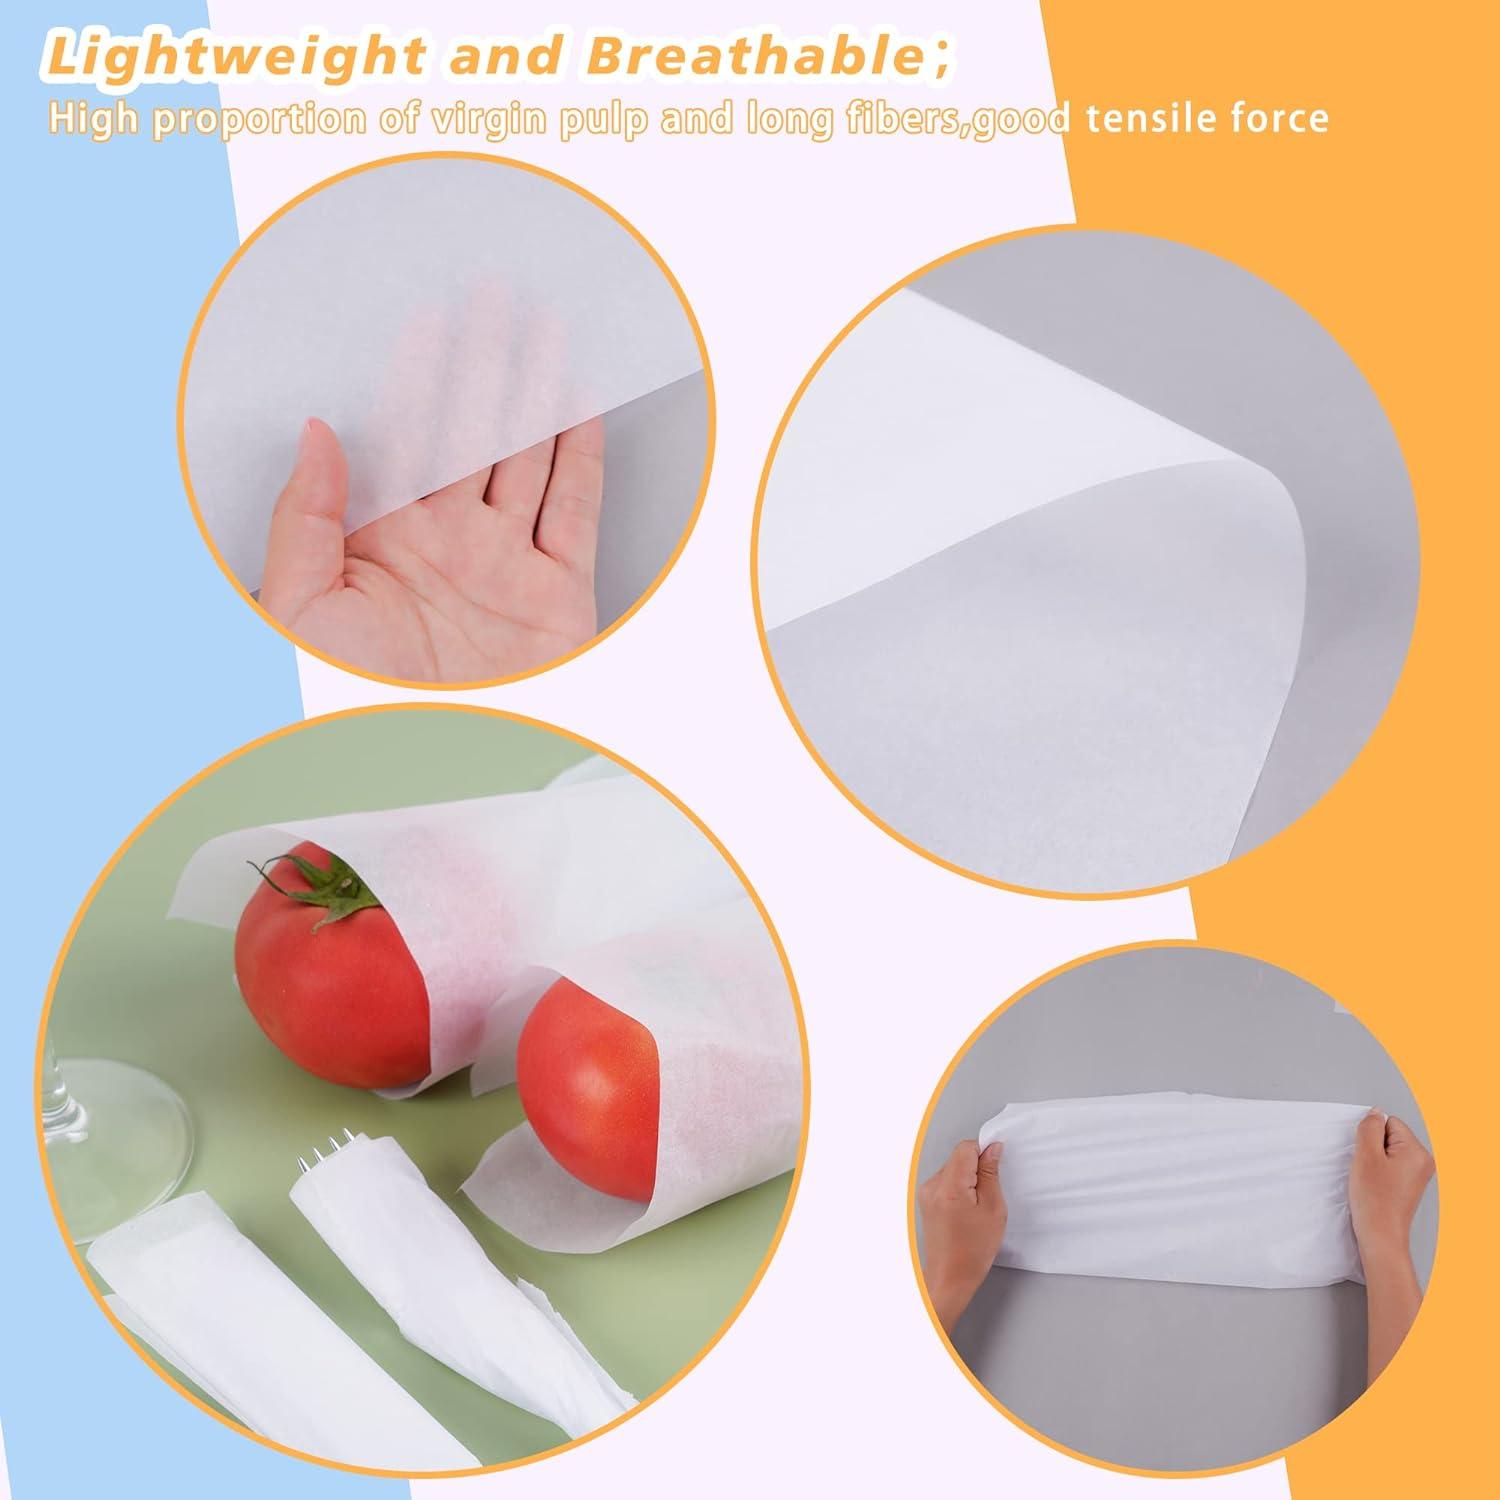 100 Sheets 15 x 20 ACID FREE White Tissue Paper UNBUFFERED Archival